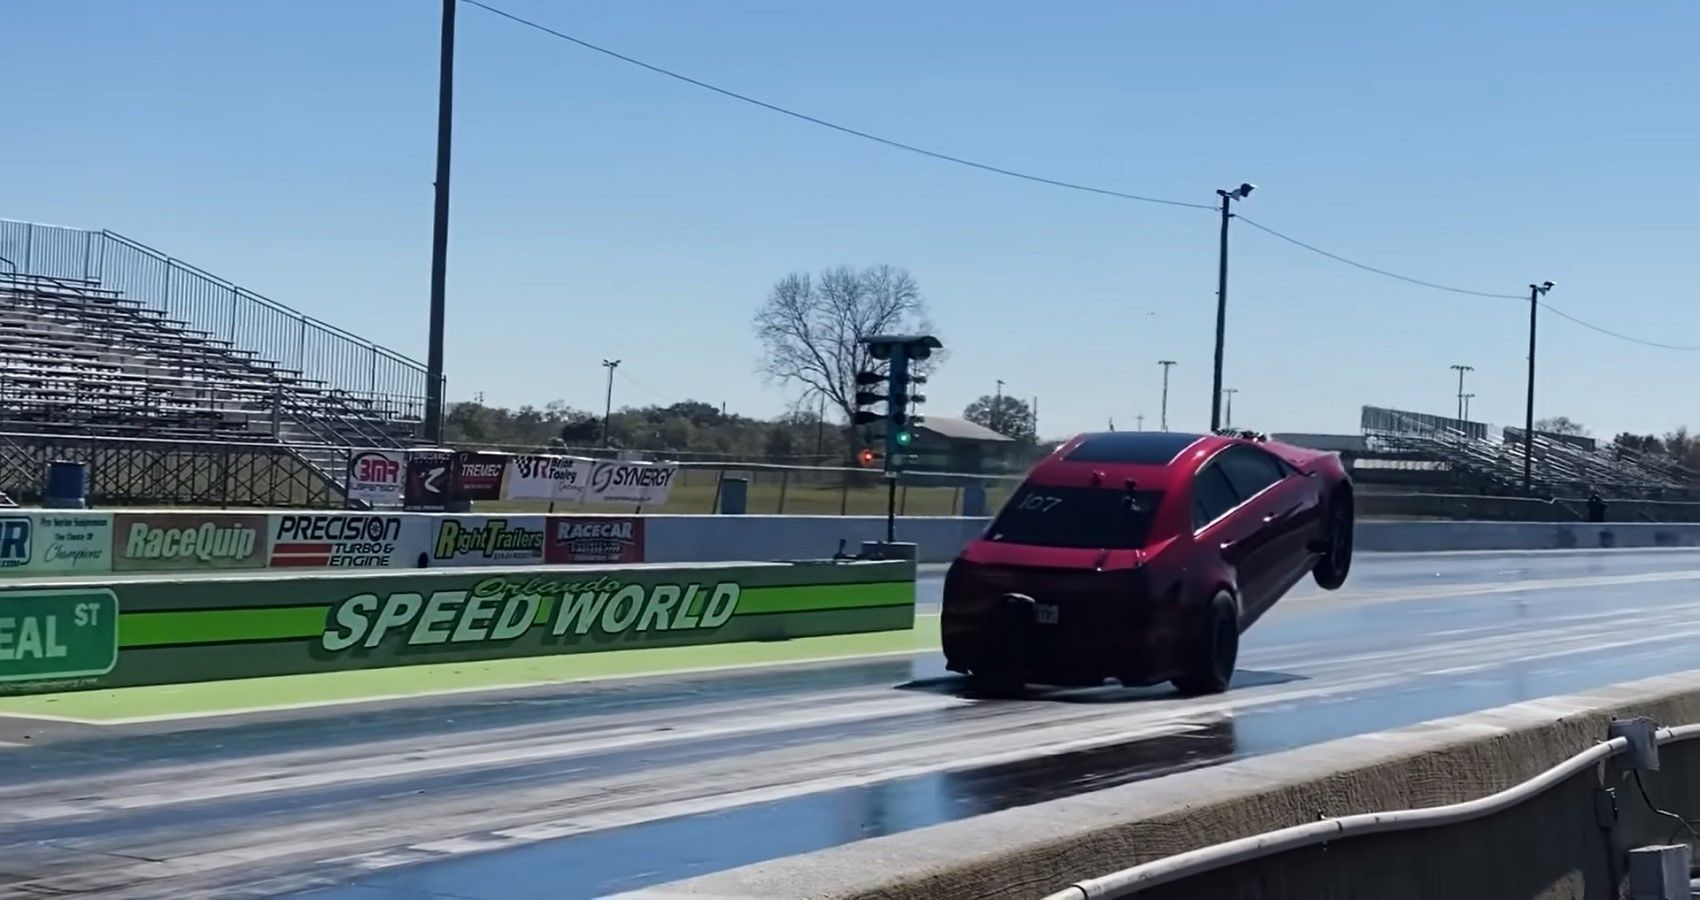 Mikhael Morris Cadillac CTS-V Drag racer wheelie, view from distance on track